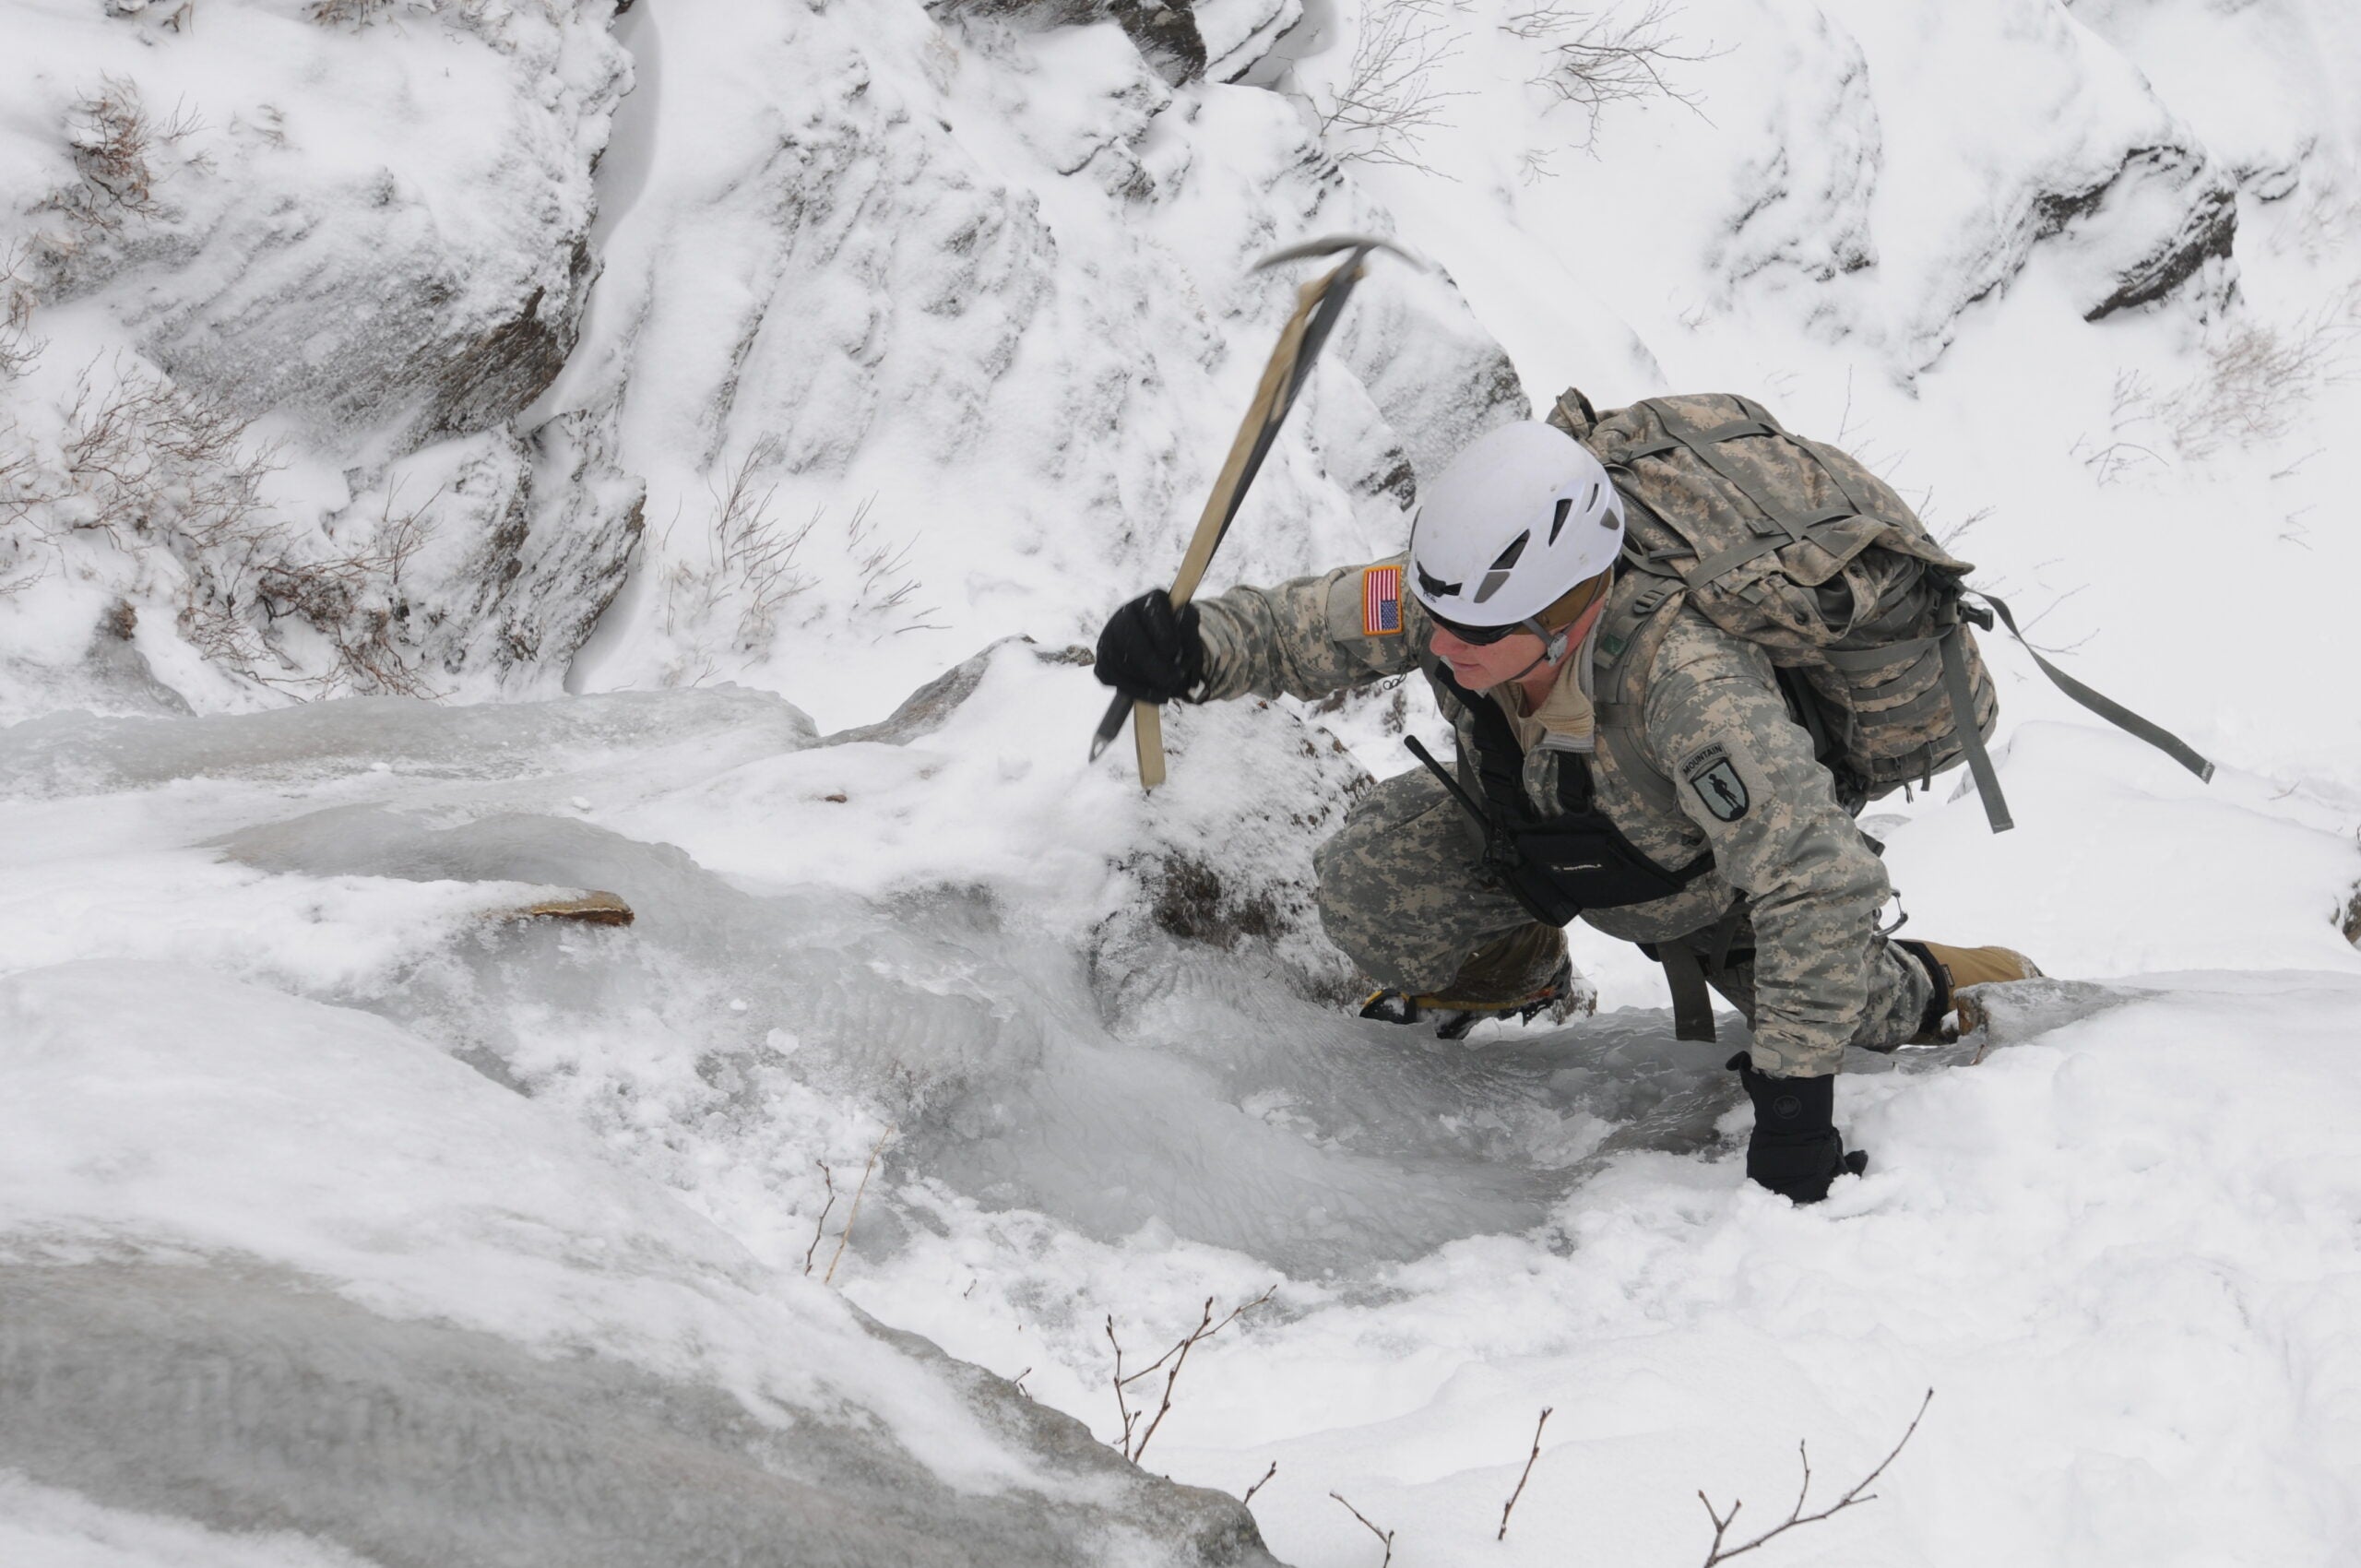 An instructor with the U.S. Army's Mountain Warfare School leads Soldiers on an ascent through a ravine at Smugglers' Notch, Vt., Feb. 14, 2013. The two-week course is taught by the Vermont National Guard at Ethan Allen Firing Range in Jericho, Vt.  (U.S. Army photo by 1st Lt. Jeffrey Rivard/Released)